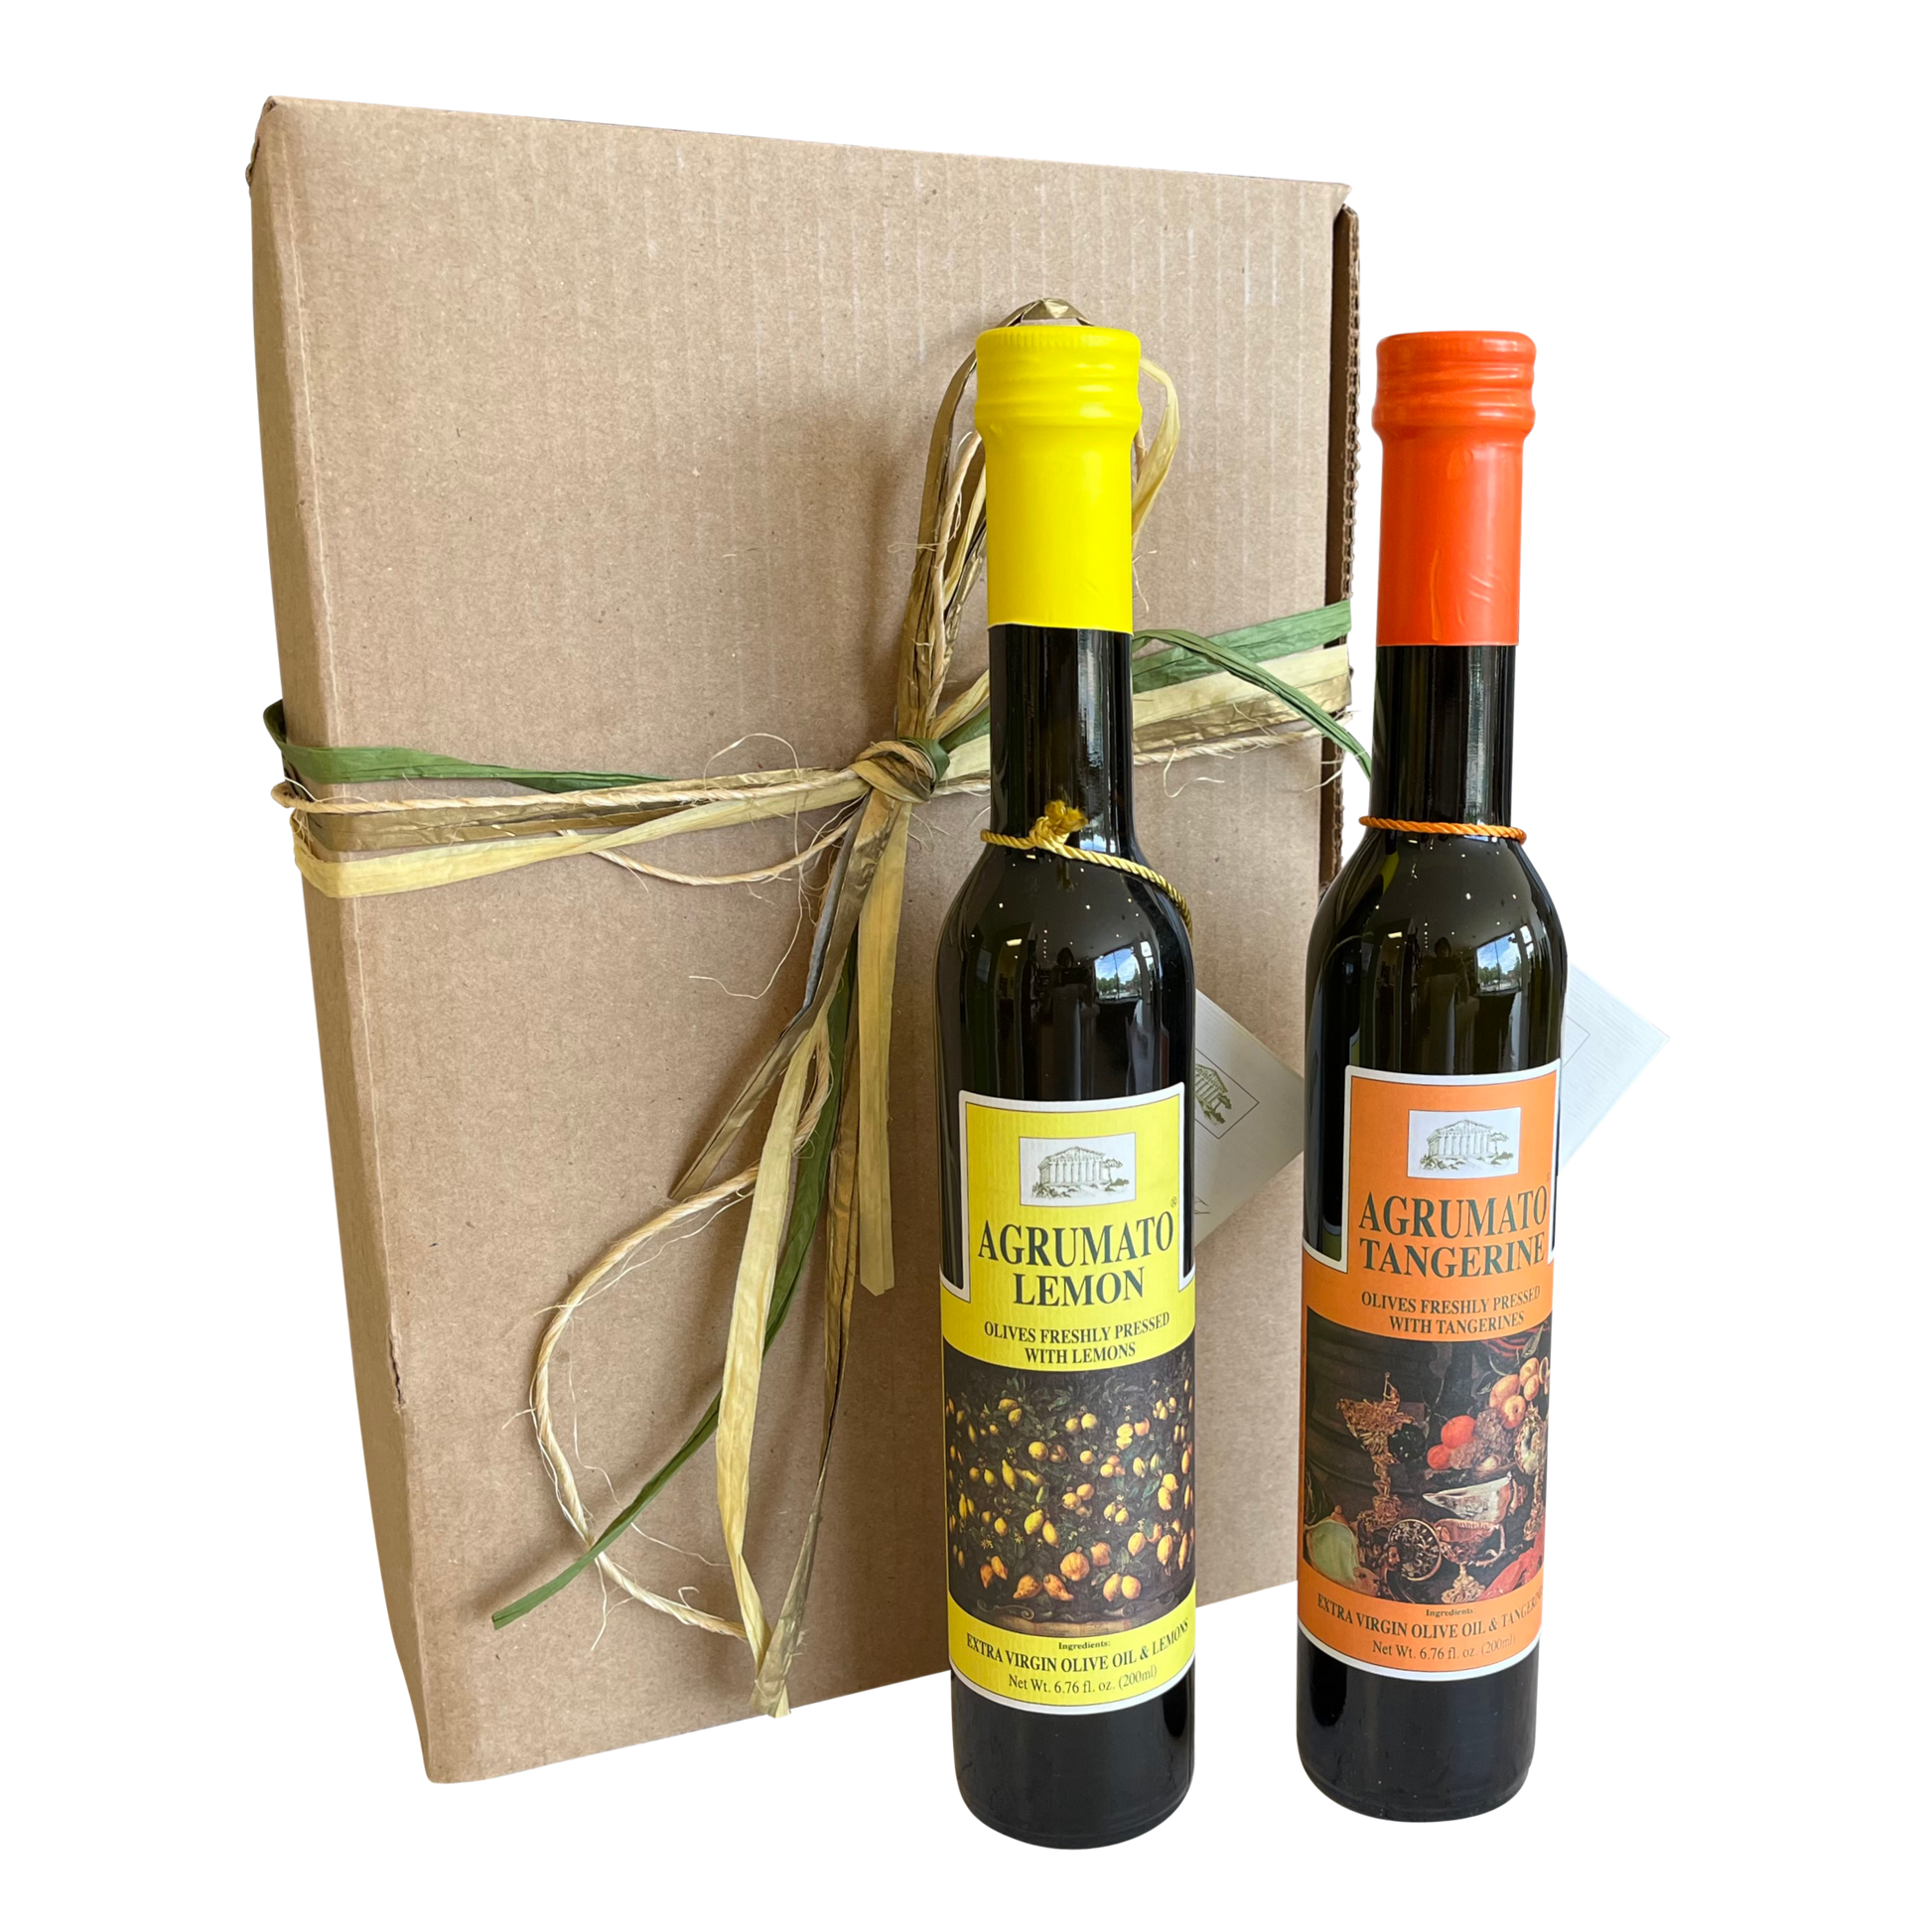 Agrumato Lemon & Tangerine Condimento Olive Oil Gift Set with Brown Rustic Box and Ribbon AGR-122